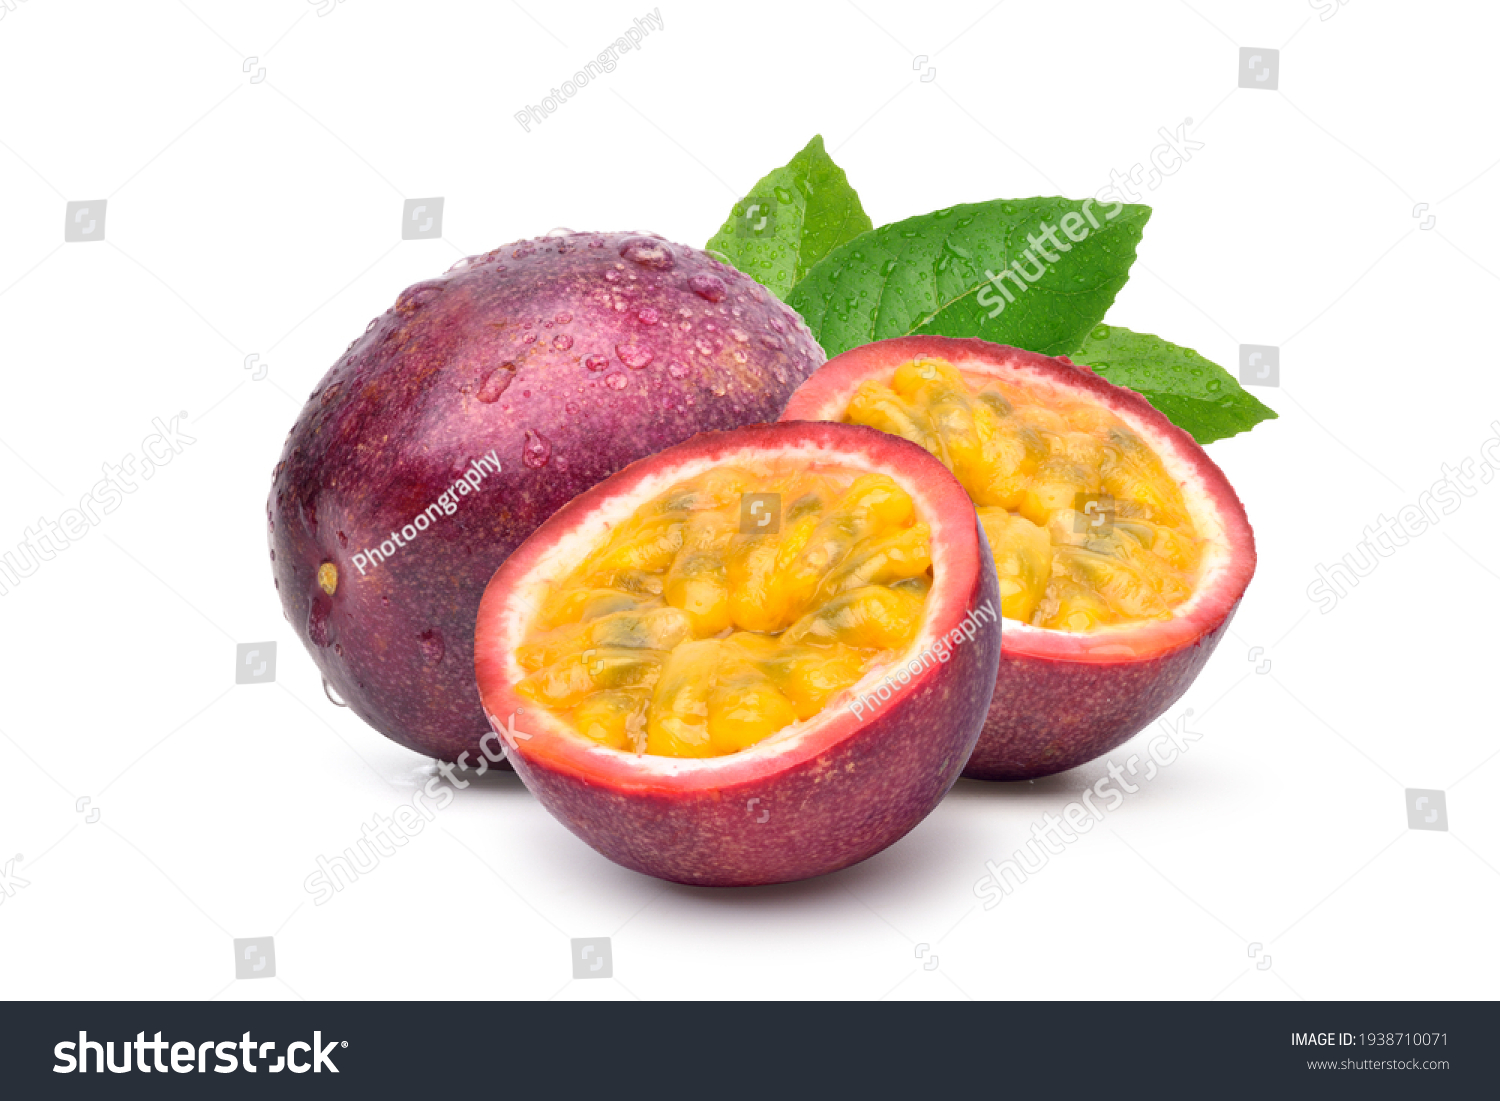 Purple passion fruit (Passiflora edulis) with cut in half and green leaf isolated on white background.
 #1938710071